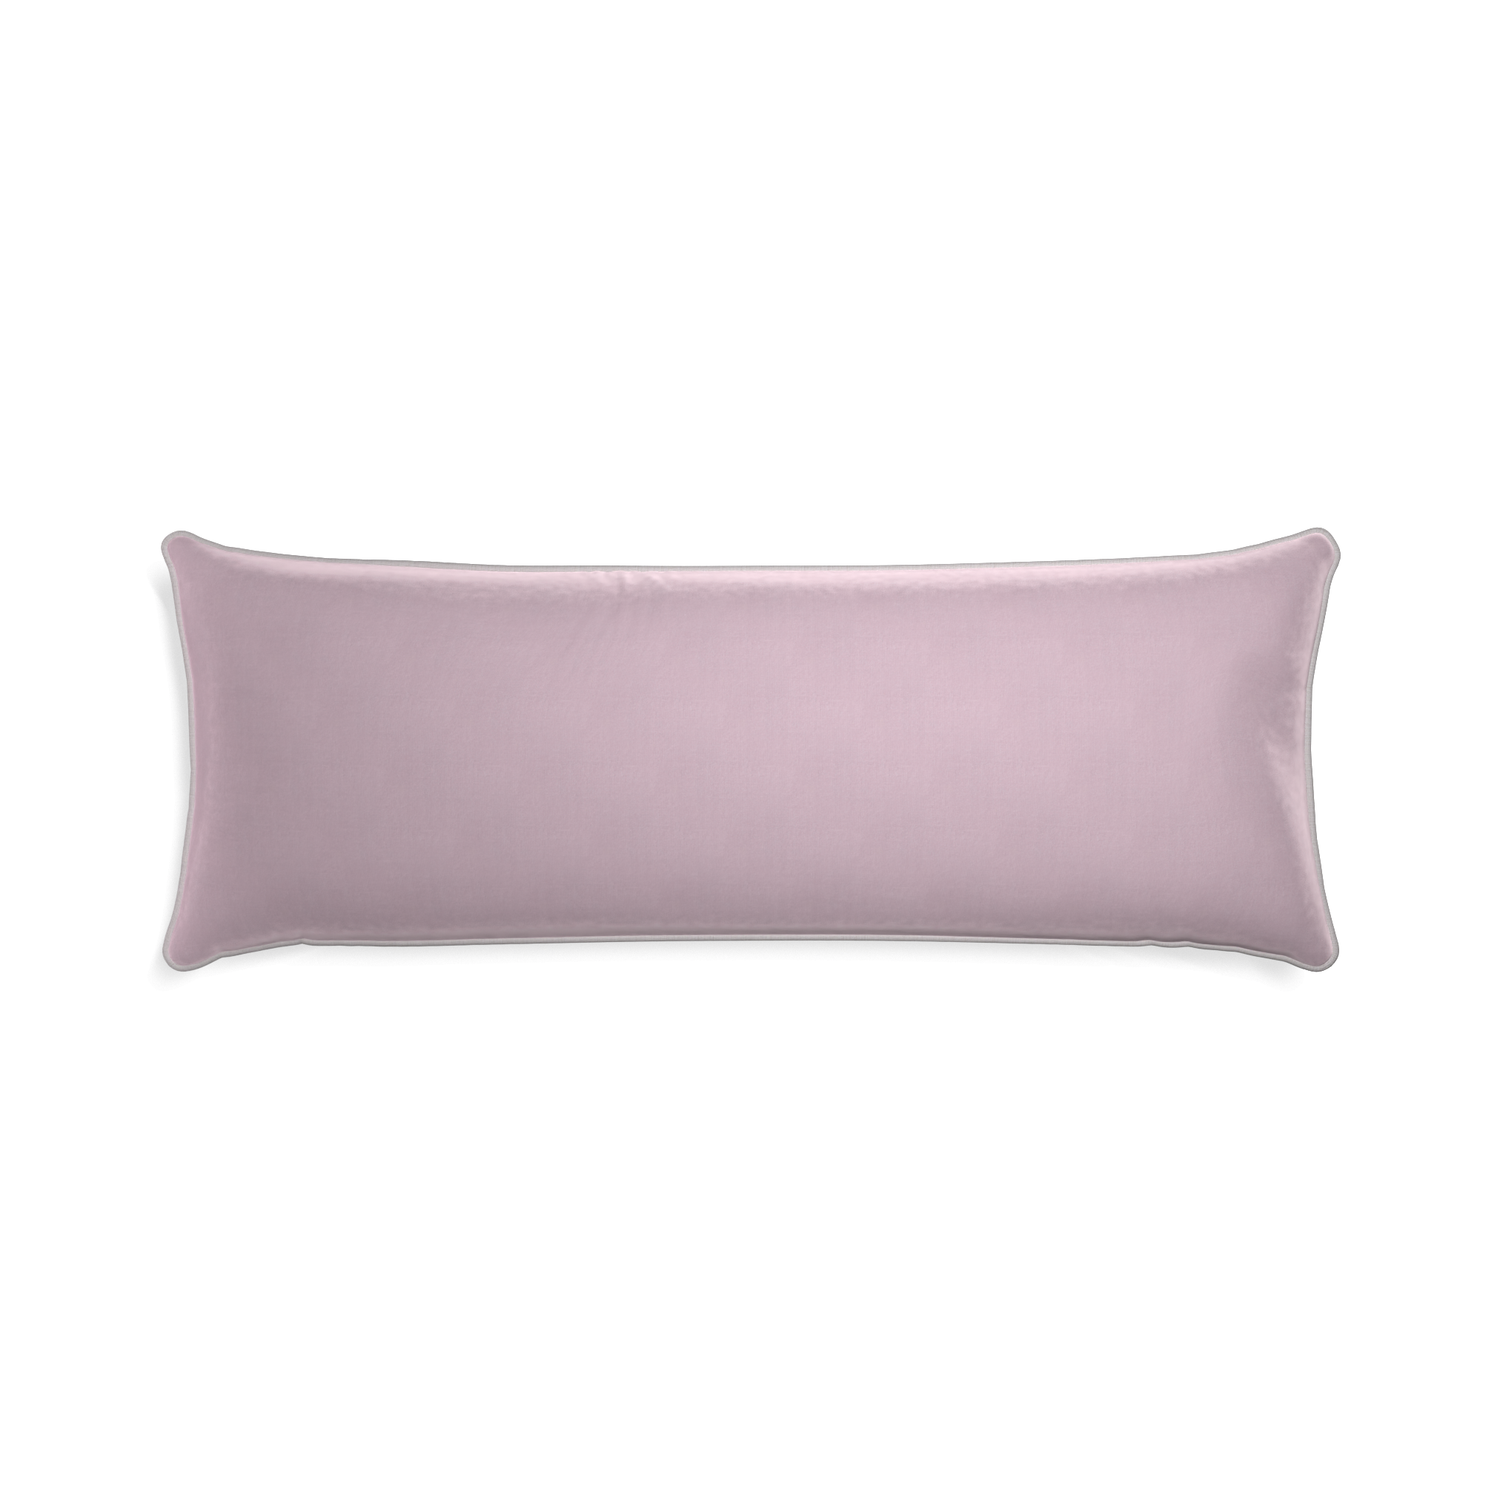 Xl-lumbar lilac velvet custom lilacpillow with pebble piping on white background